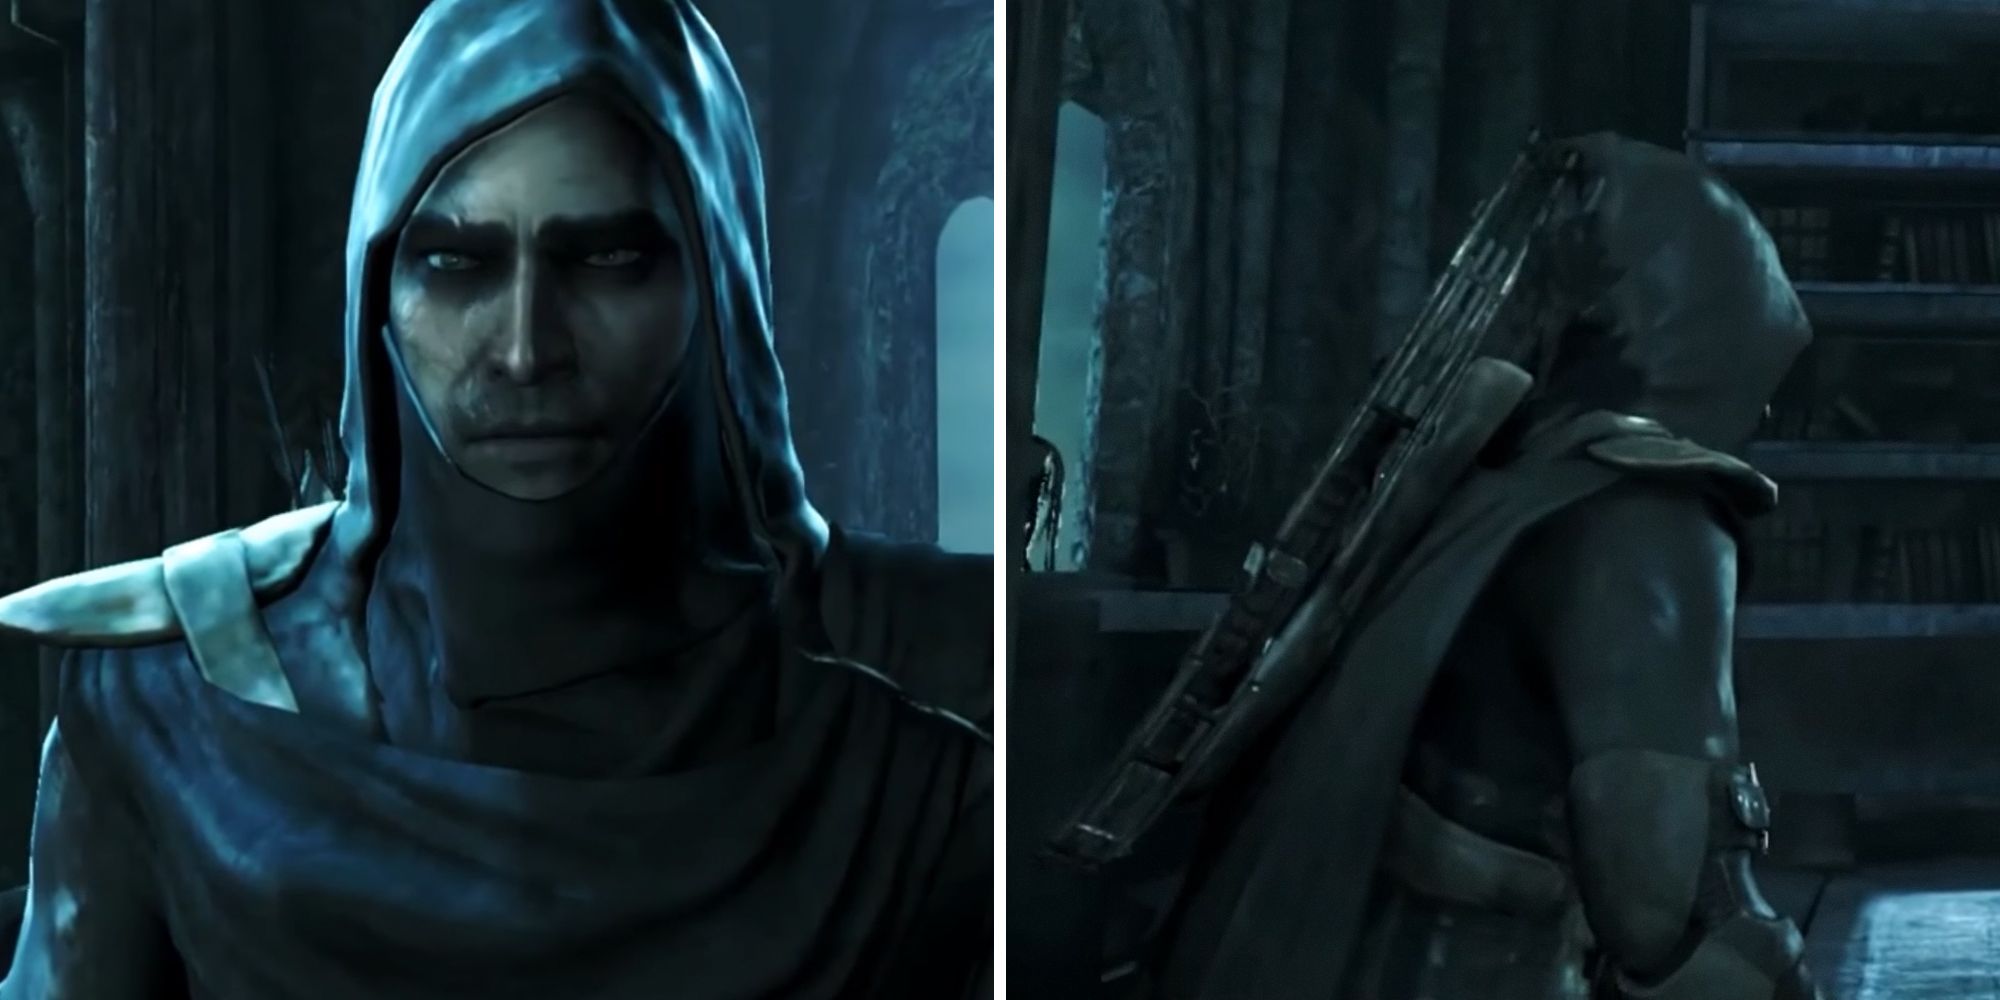 Thief cutscene split image. Wearing an all black outfit.